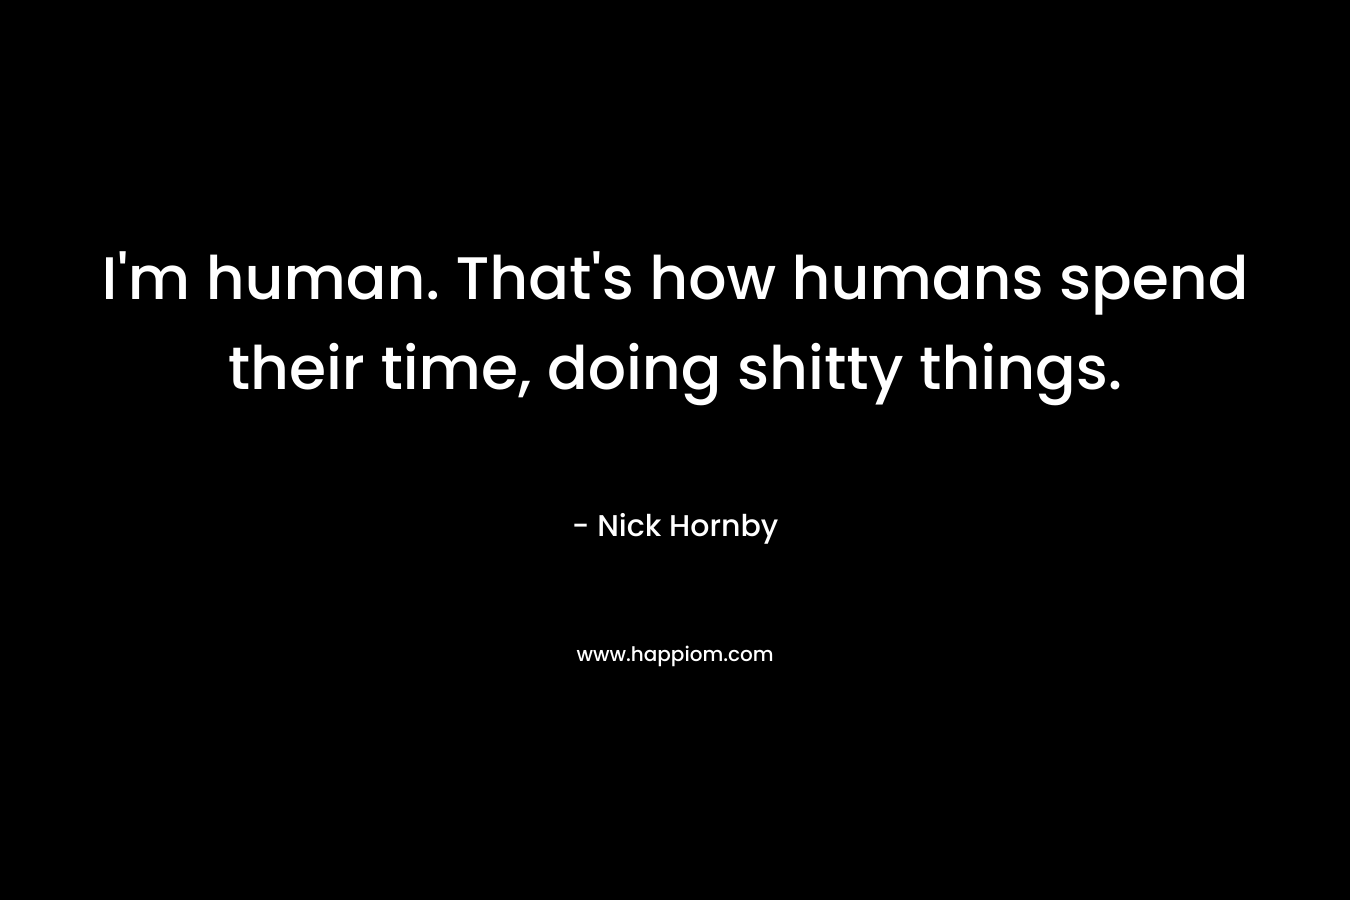 I’m human. That’s how humans spend their time, doing shitty things. – Nick Hornby